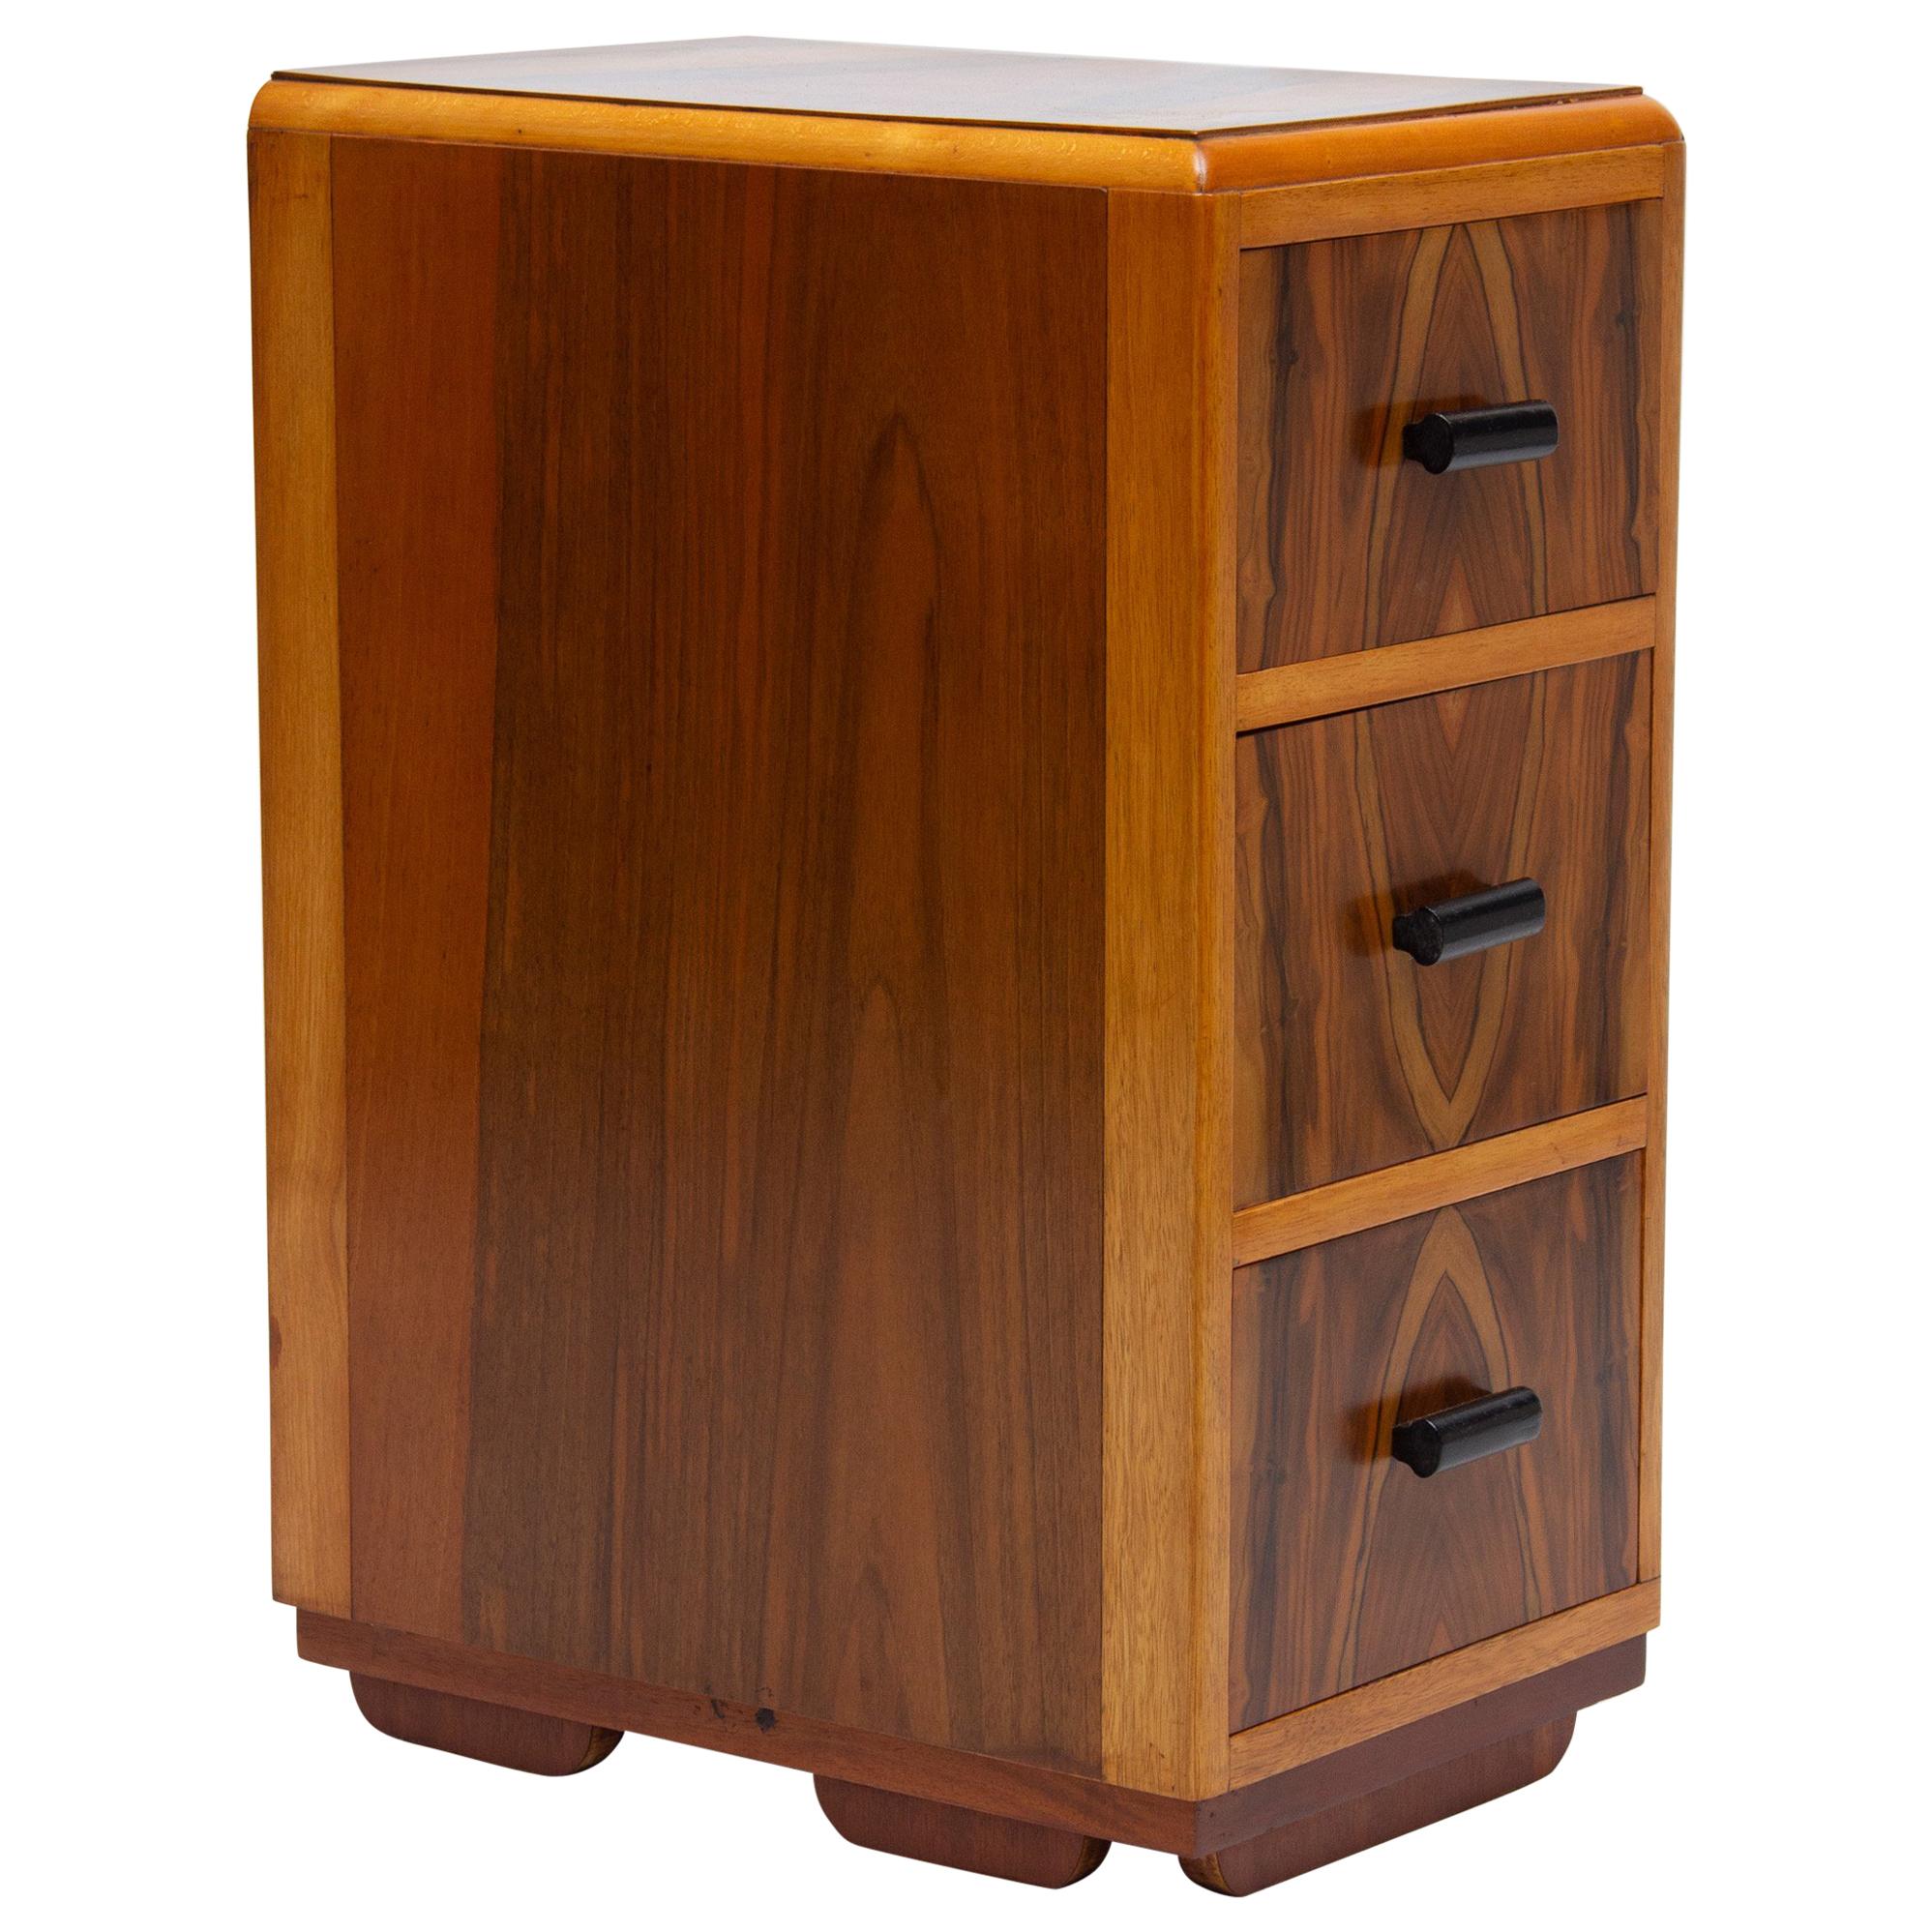 British Pair of Art Deco Bedside Cabinets